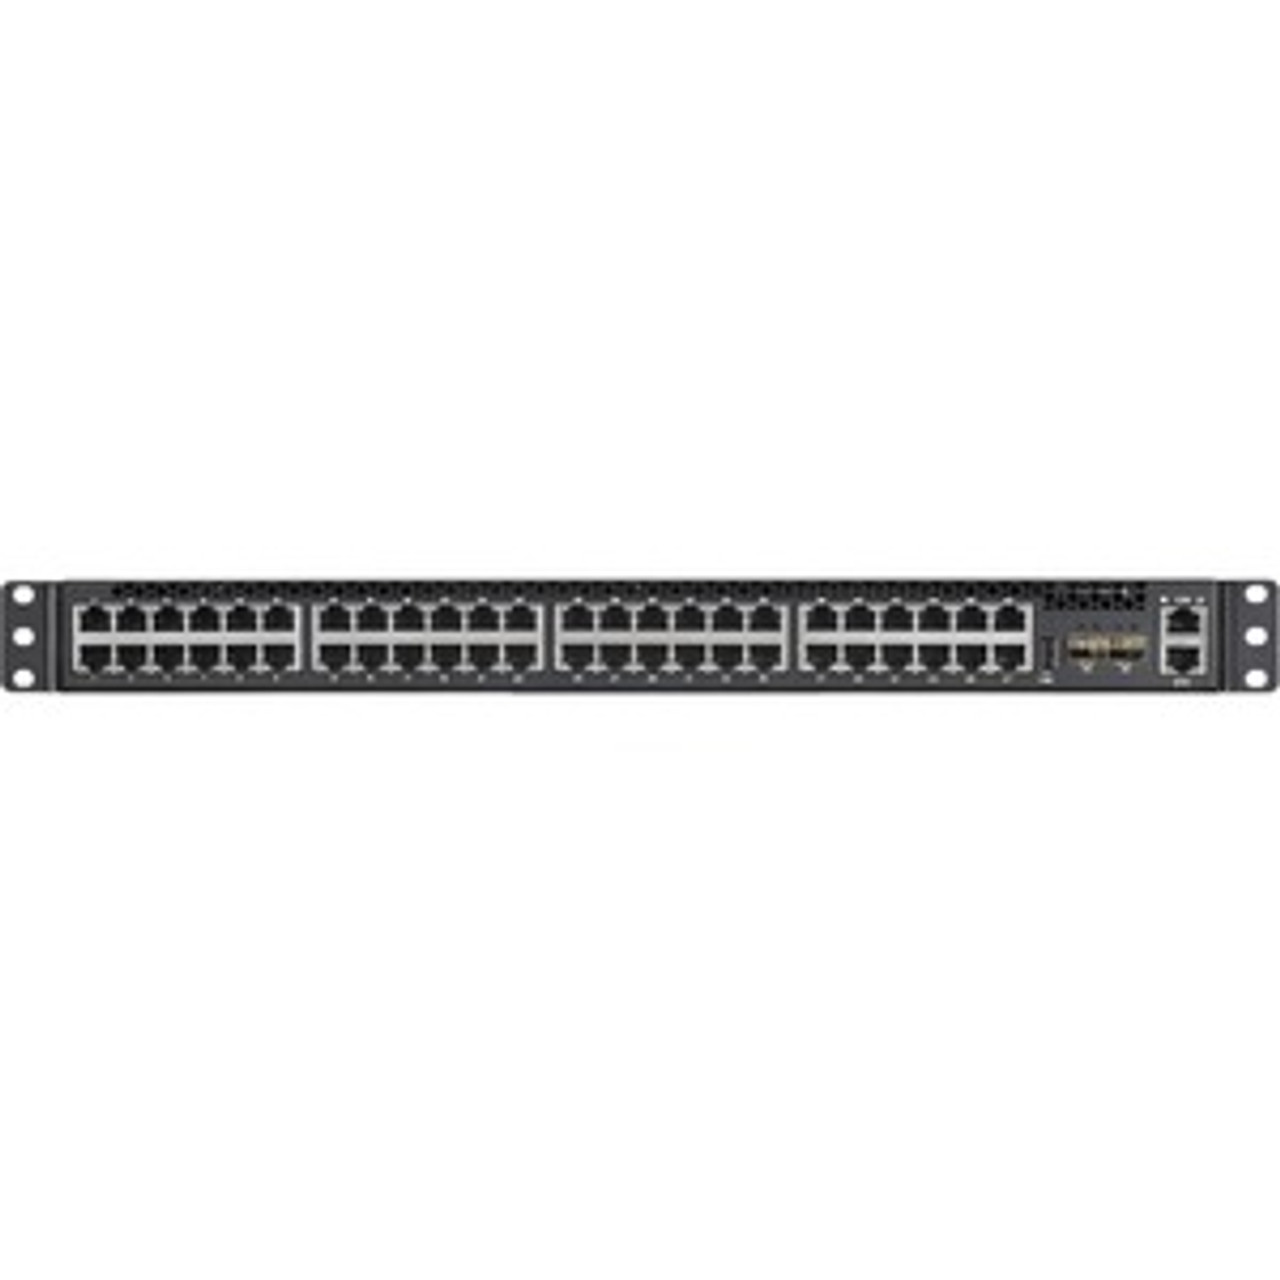 1LY4AZZ000P QCT 1G/10G Enterprise-Class Ethernet switch - 48 Ports - Manageable - Gigabit Ethernet - 10/100/1000Base-T - 4 Layer Supported - Modular - 4 SFP